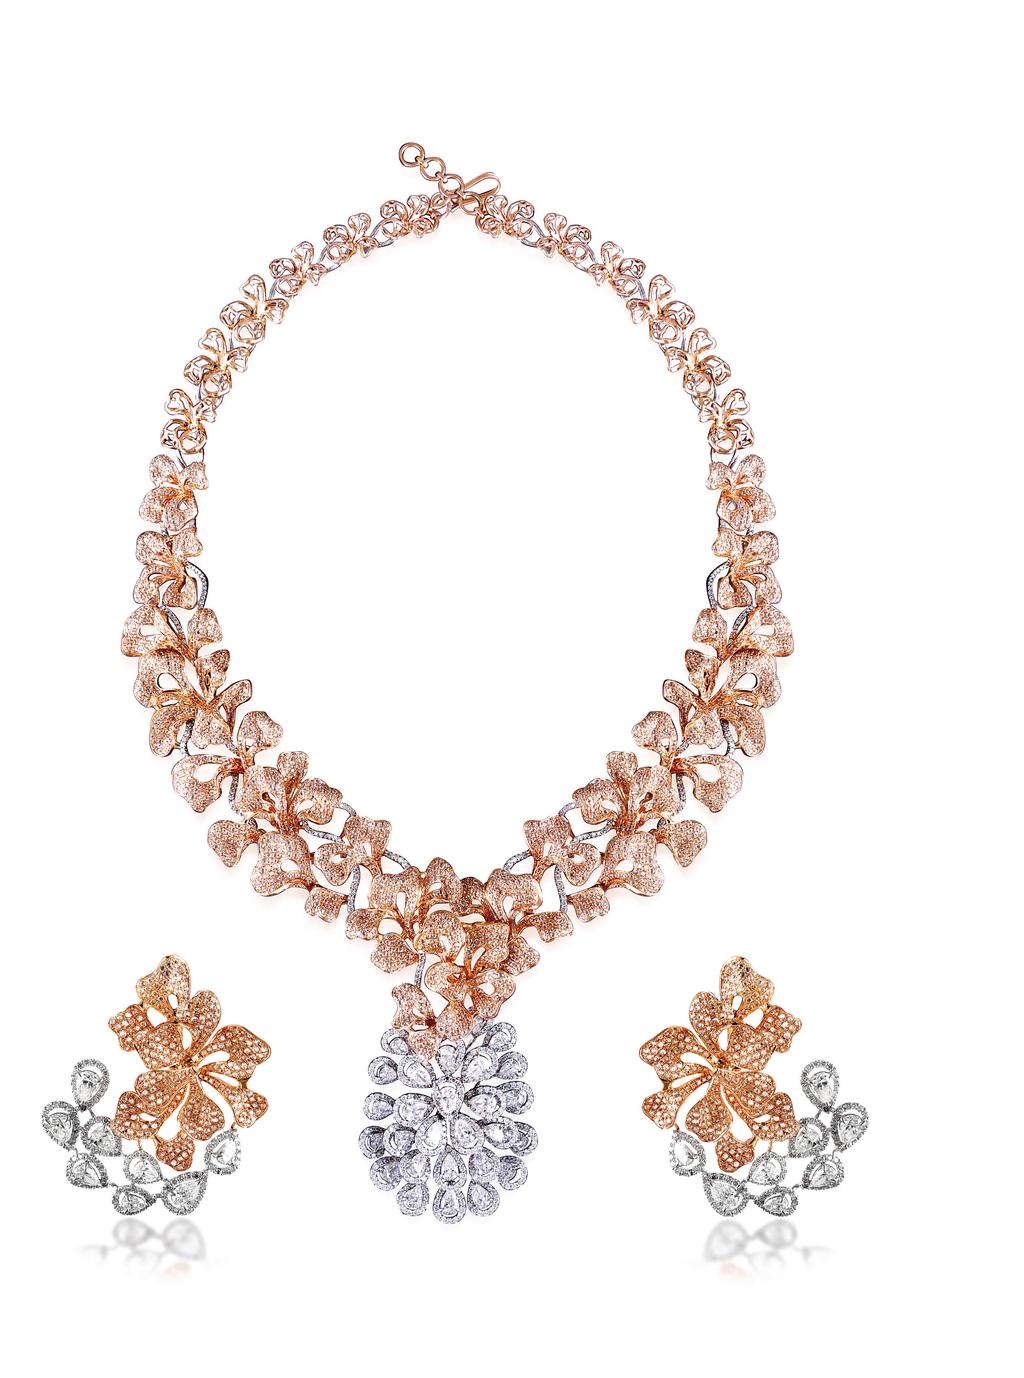 BRIDAL TREASURES Come summer, and many brides will be readying to take their wedding vows. The sunny, warm season calls for jewels that are frosted, pastel hued yet superlative.